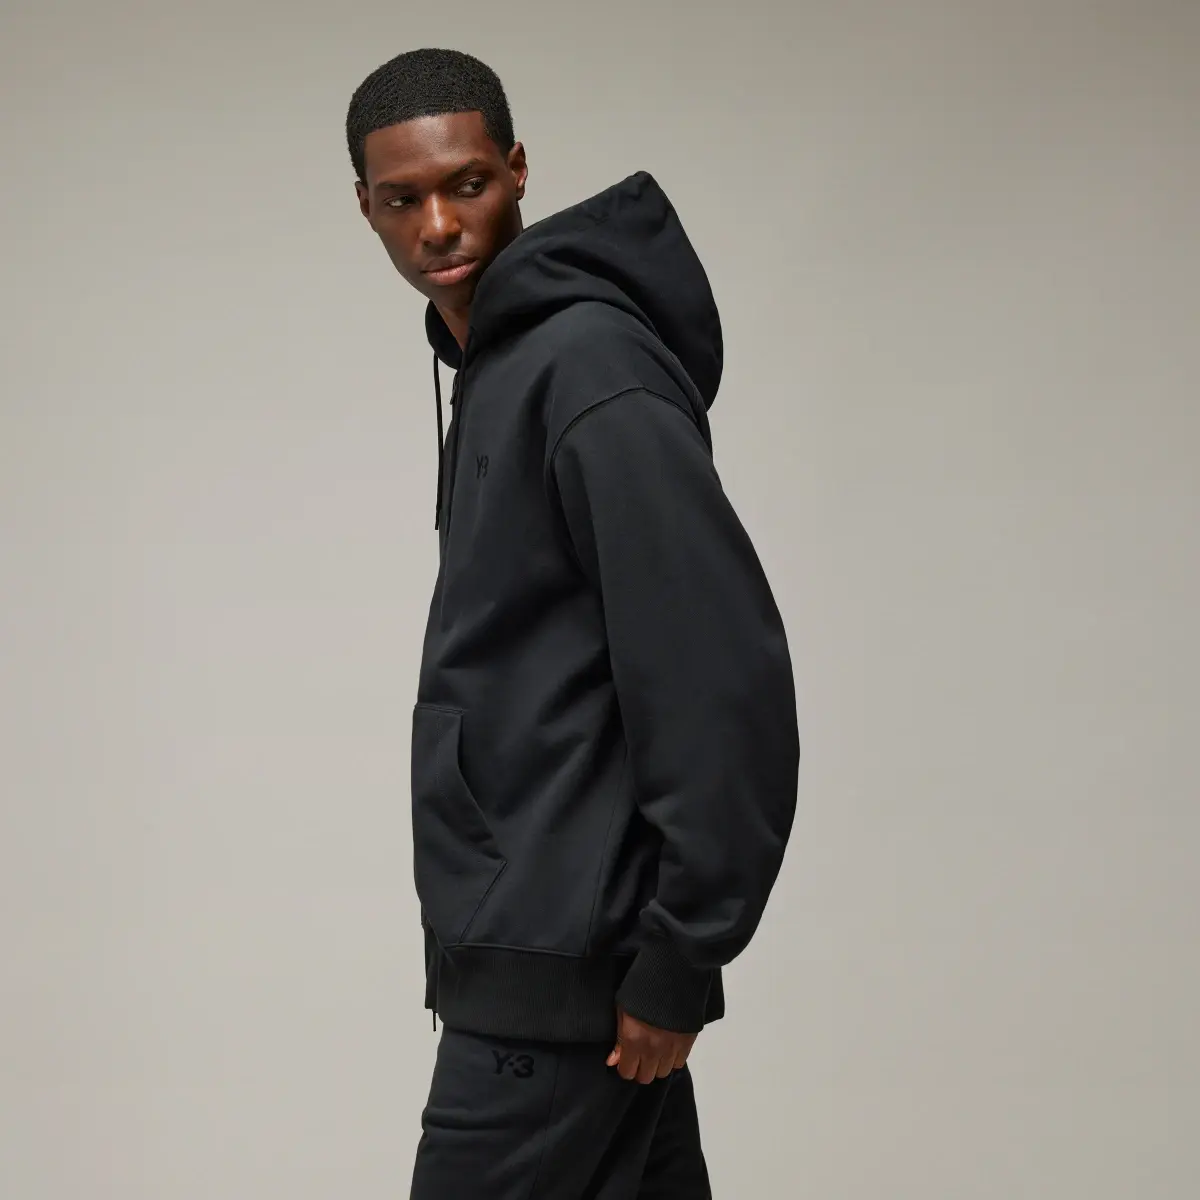 Adidas Y-3 French Terry Zip Hoodie. 2